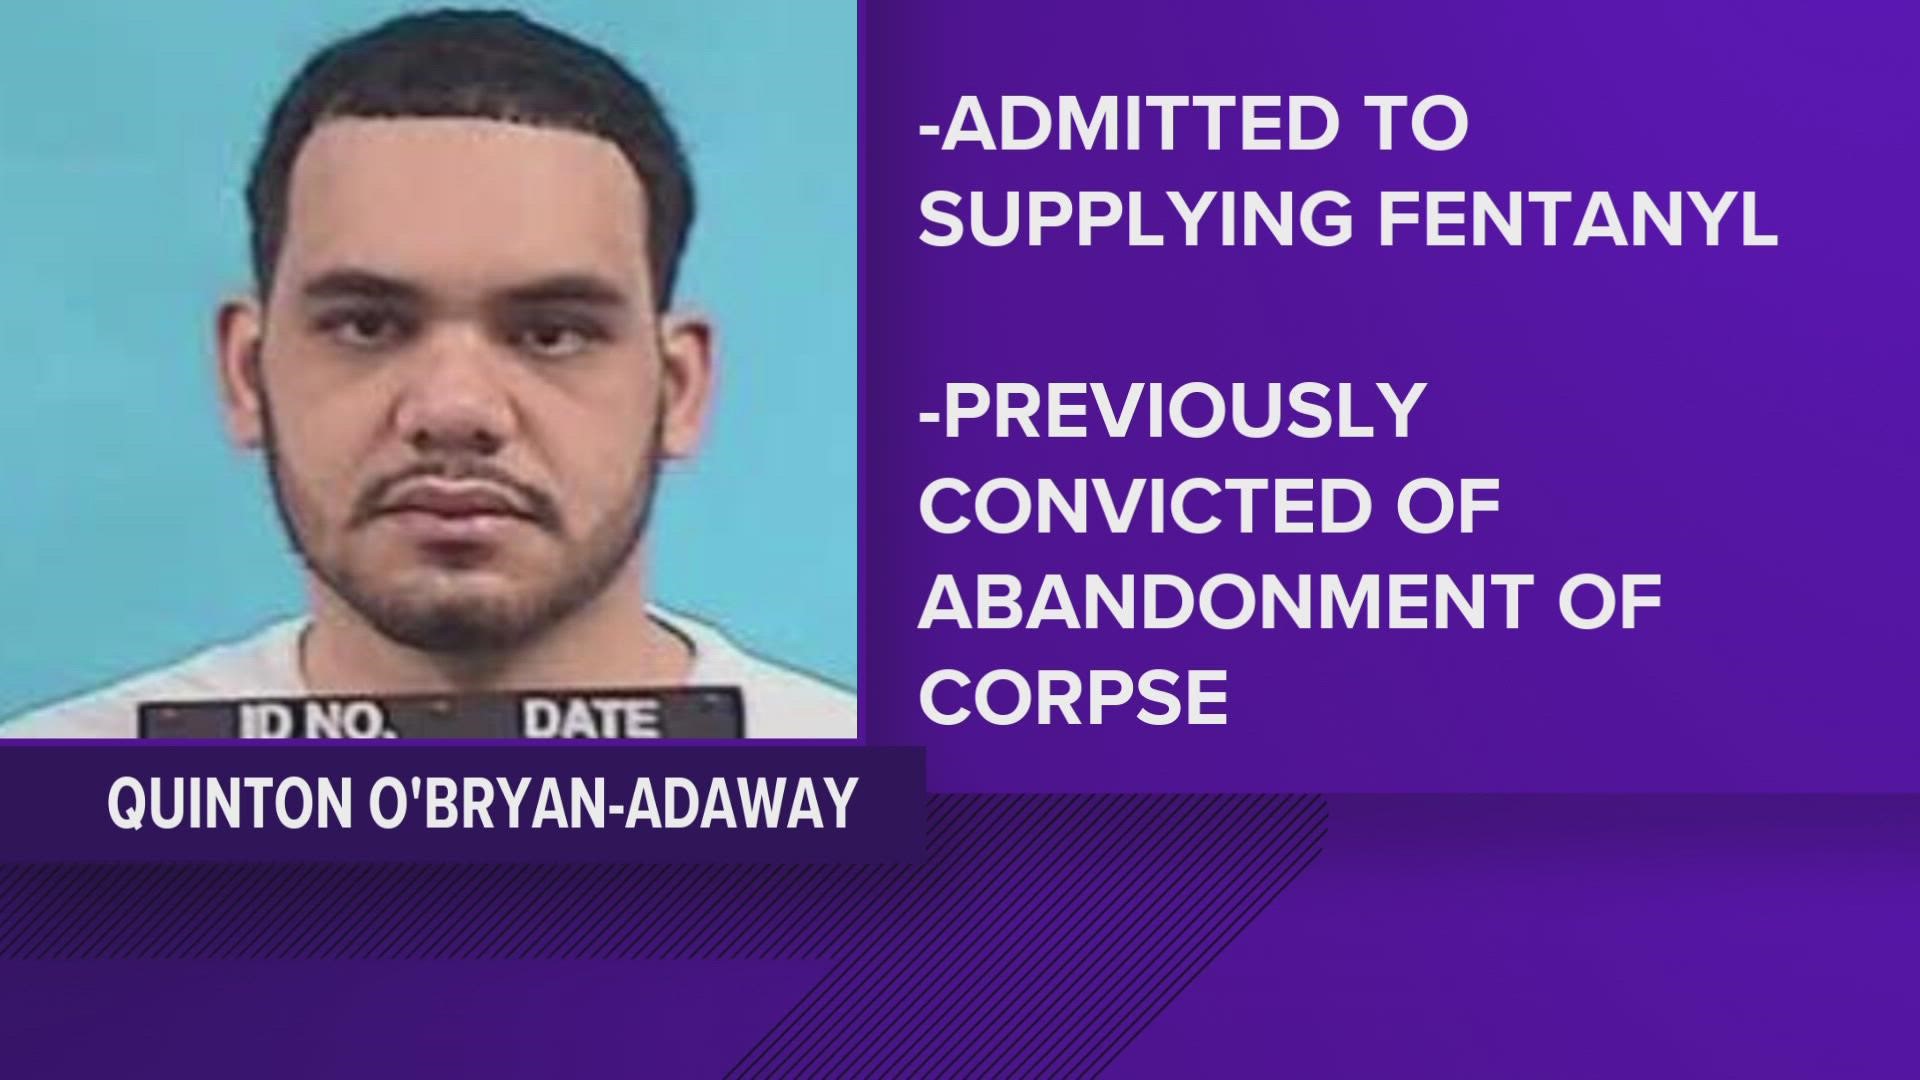 Quinton O'Bryan Adaway will be sentenced in January, and both prosecutors and defense have agreed to recommend a 10-year prison sentence.